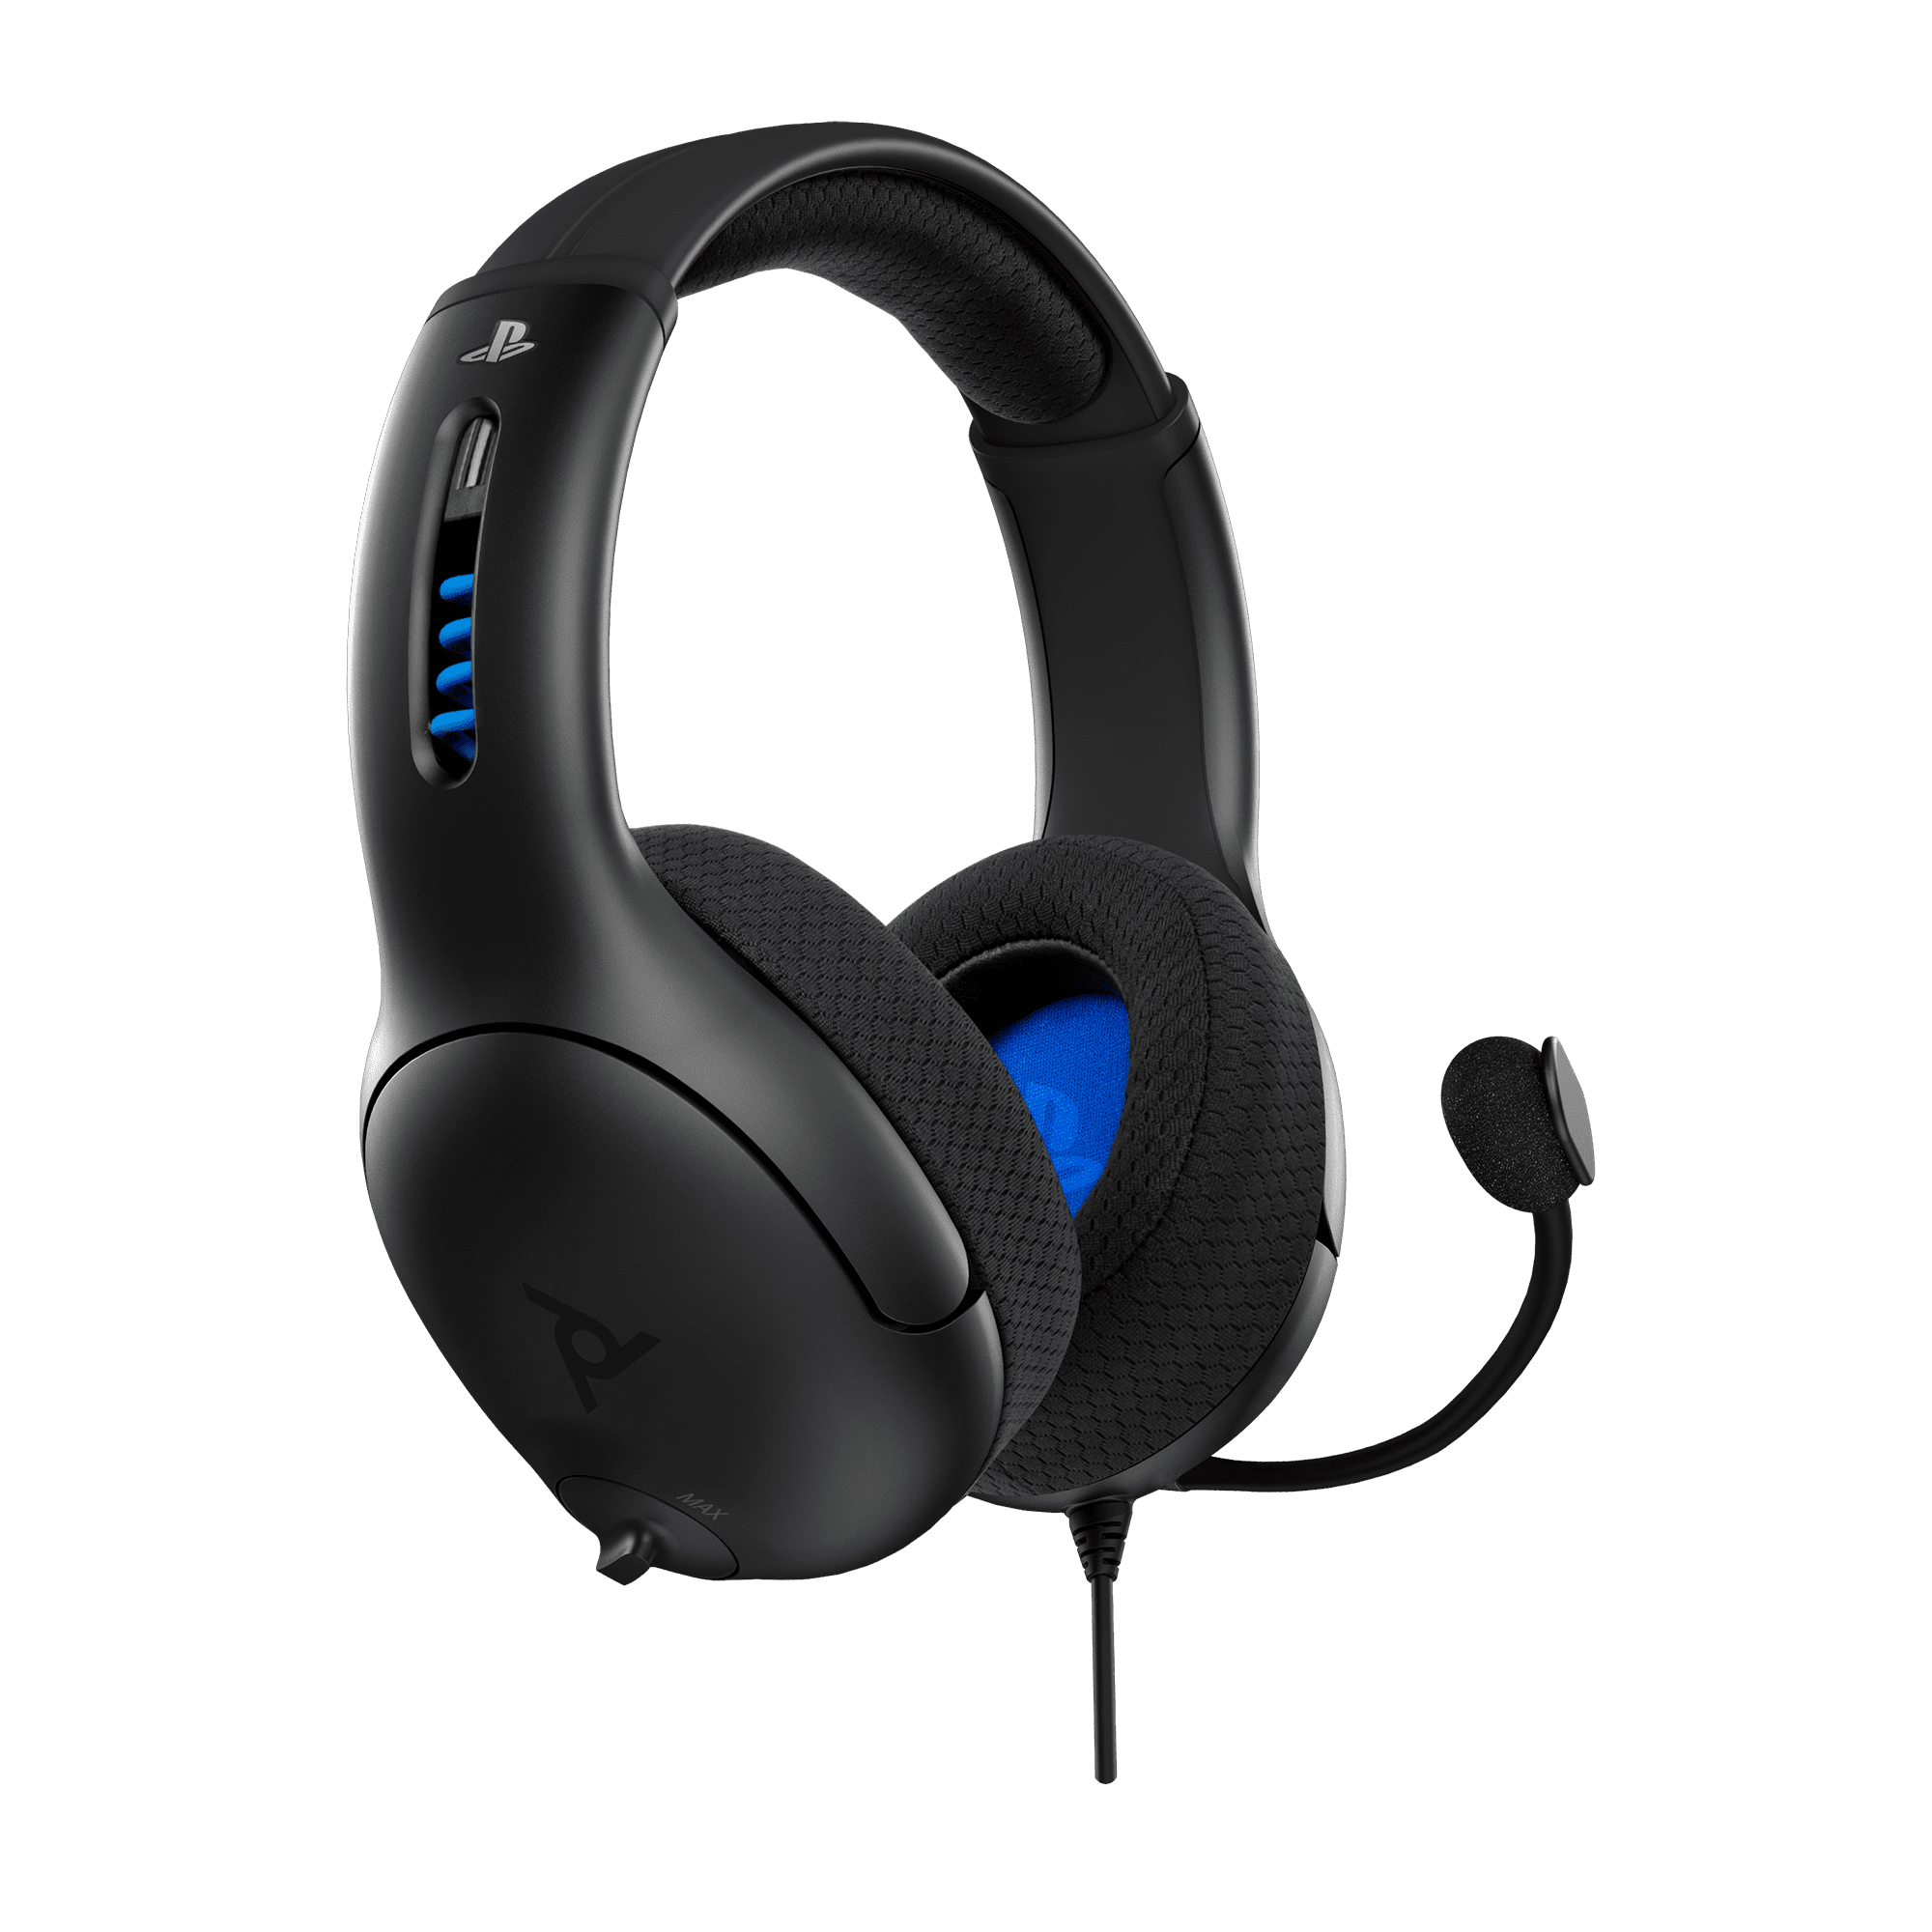 PDP AIRLITE Wired Stereo Gaming Playstation Headset with Noise Cancelling  Boom Microphone: PS5/PS4/PS3/PC (Black) Wired